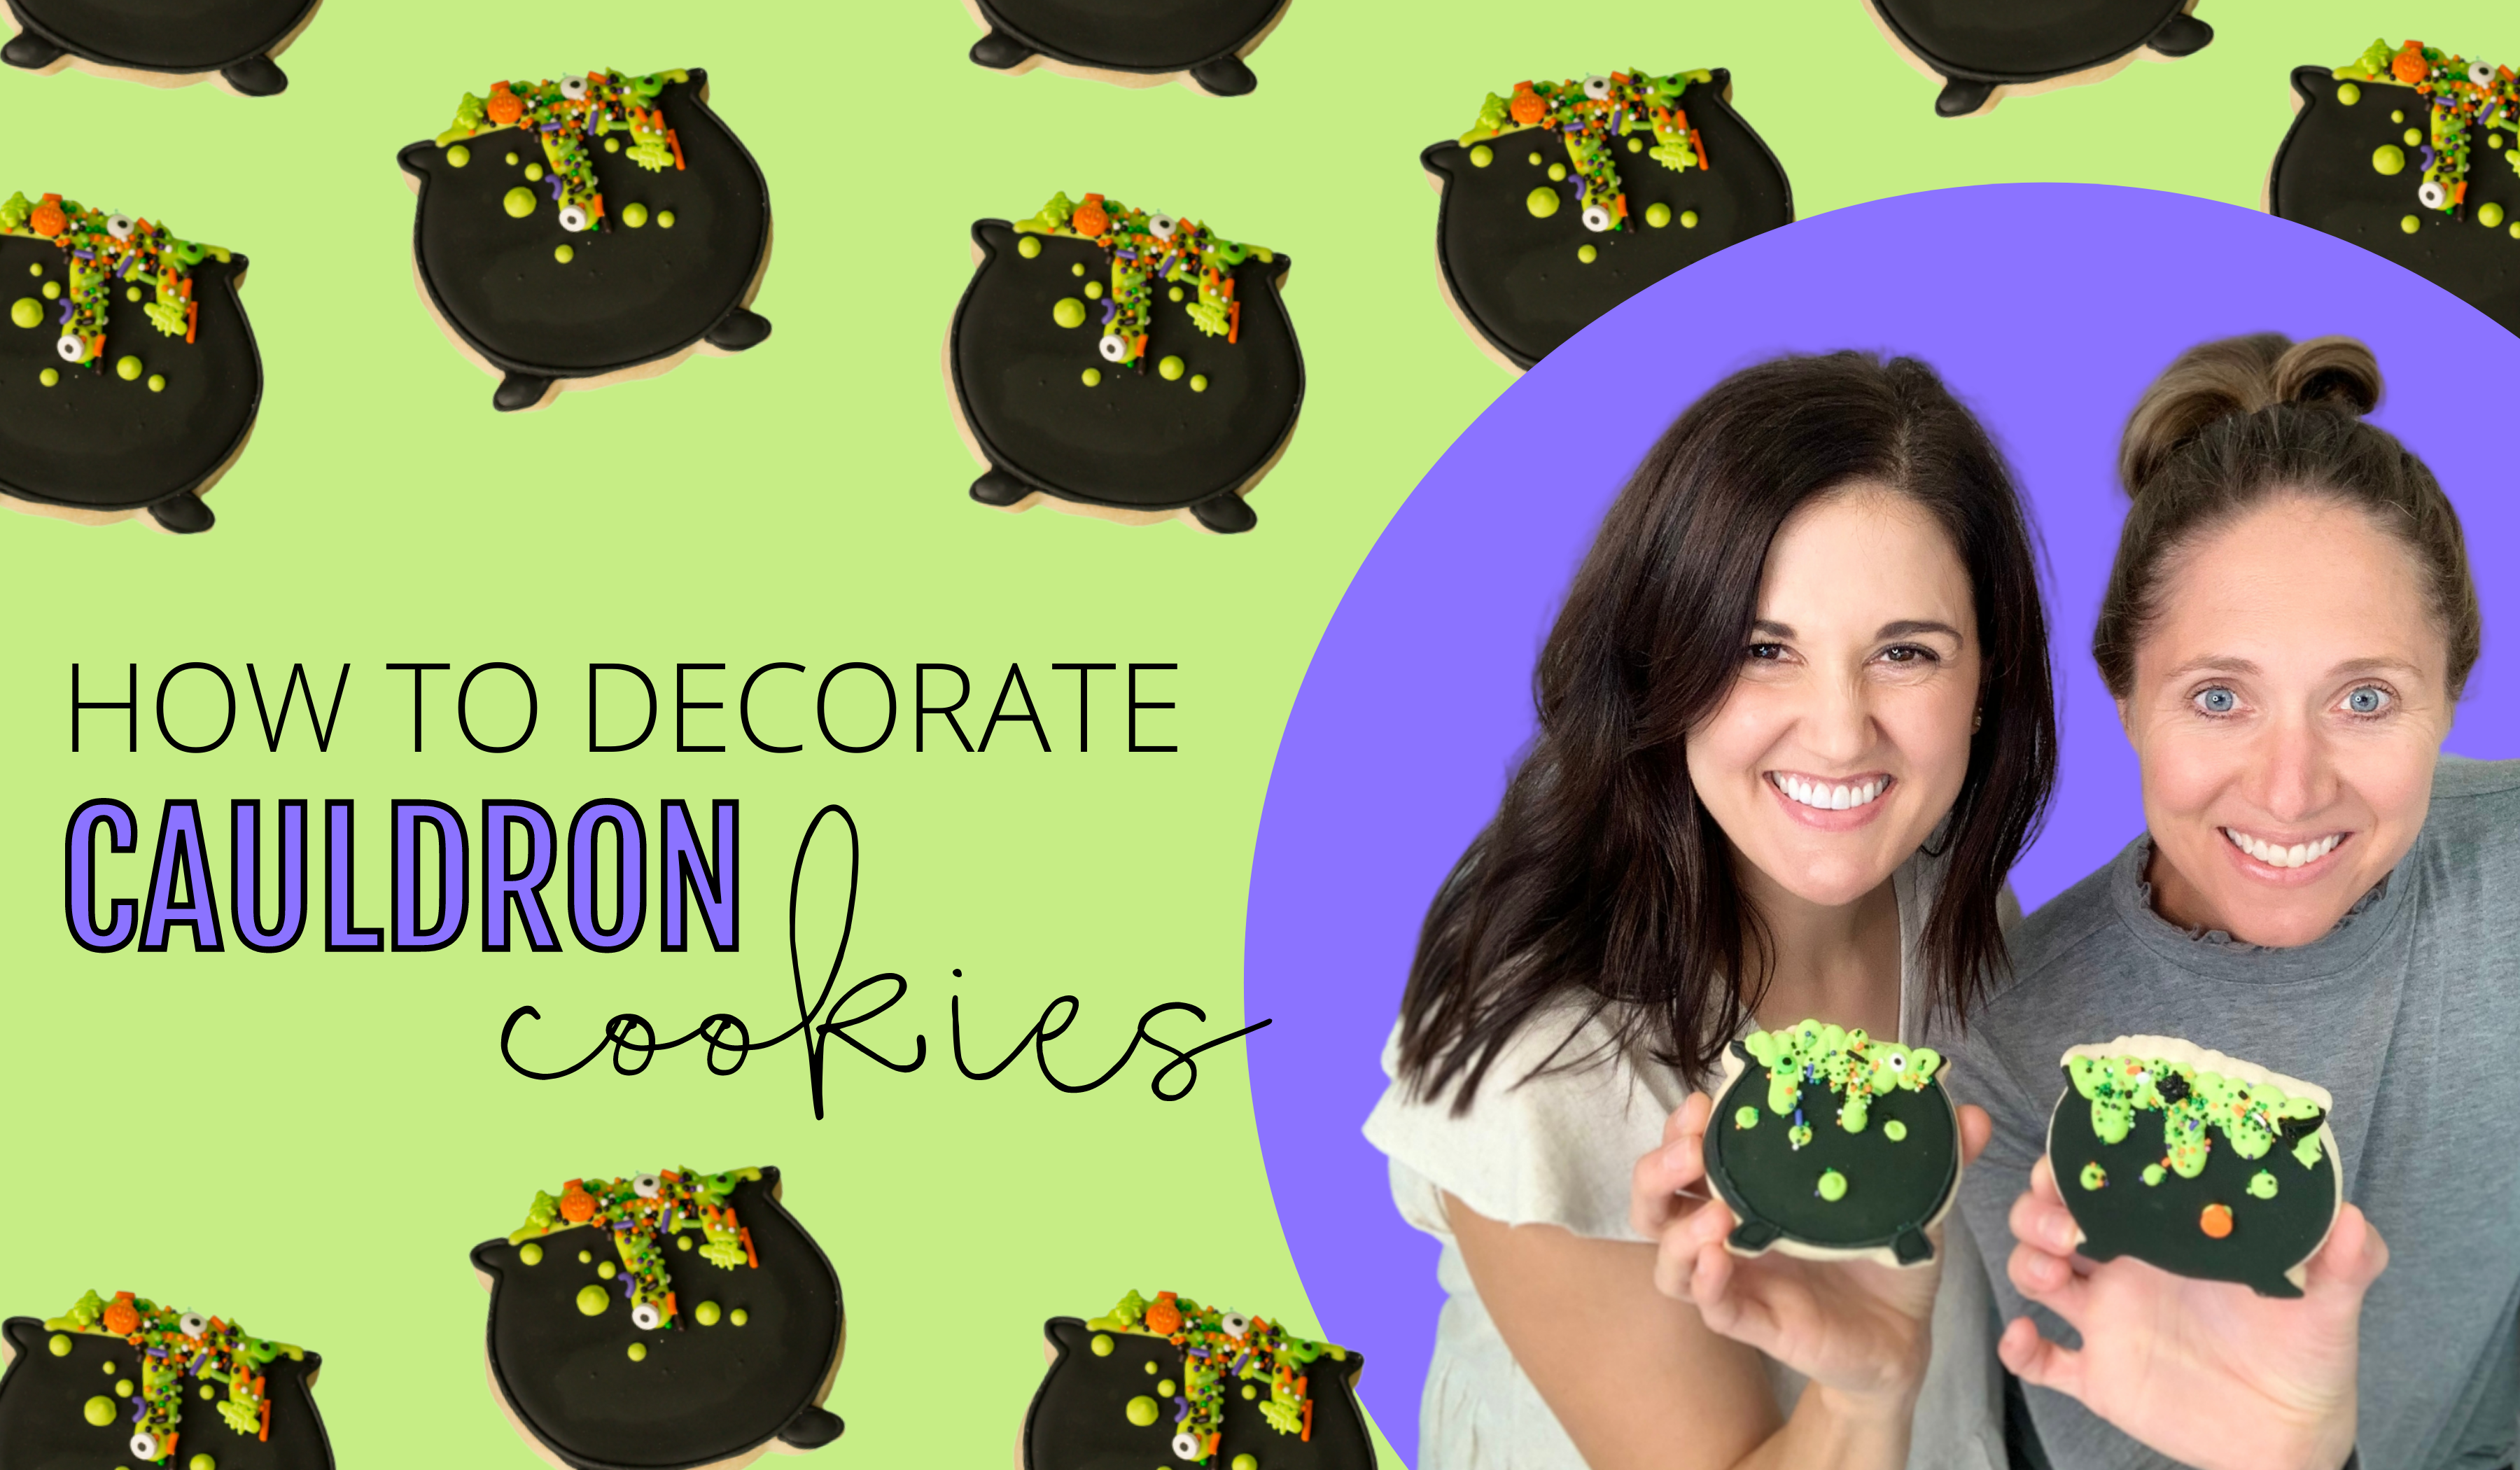 HOW TO DECORATE CAULDRON COOKIES